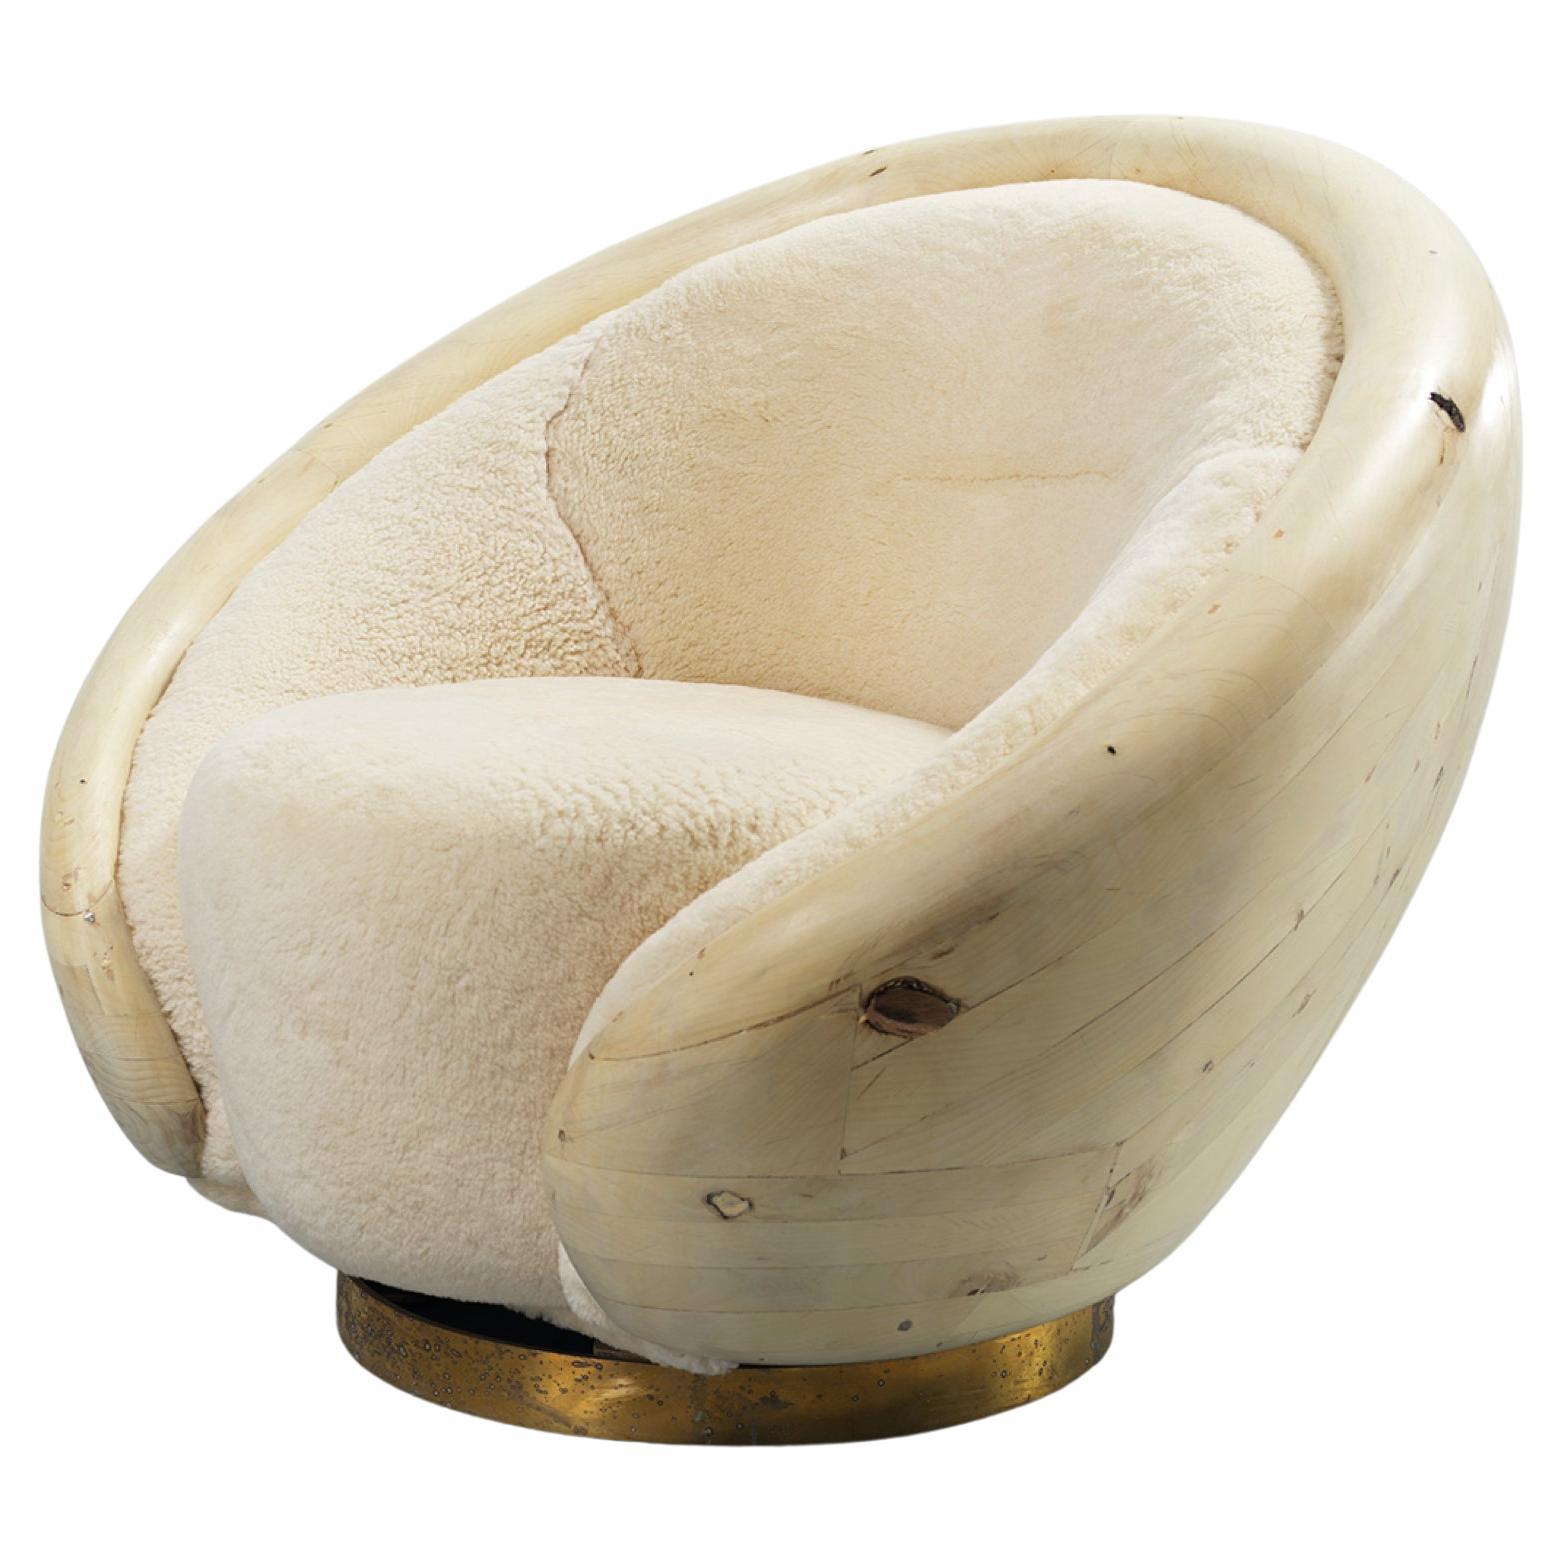 "Brioche" lounge chair by Rogan Gregory For Sale